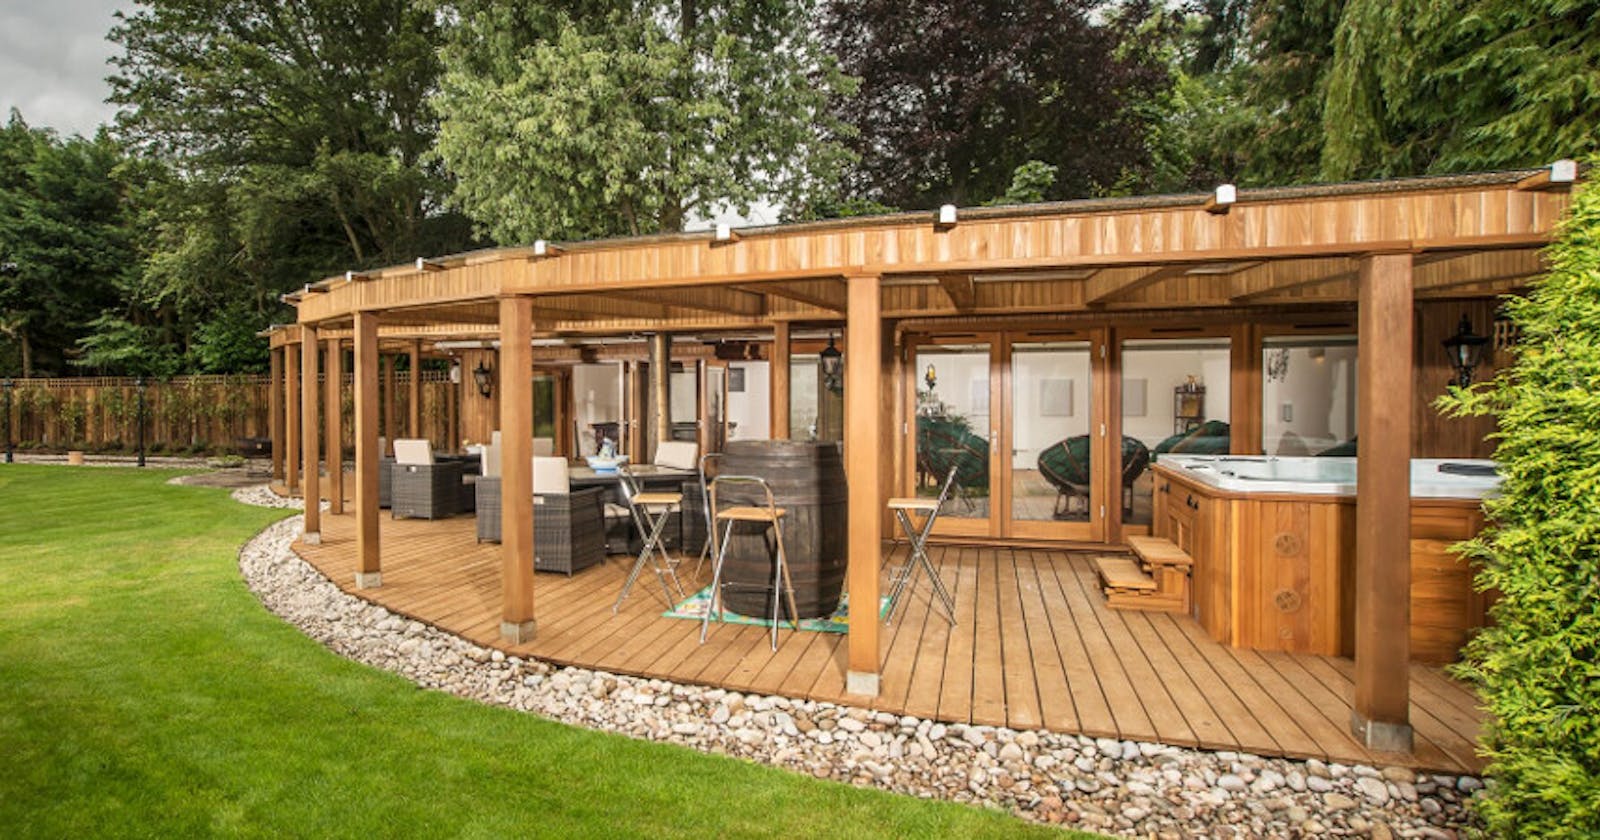 Modular Home Extensions make it simple to Extend a Home in the United Kingdom.